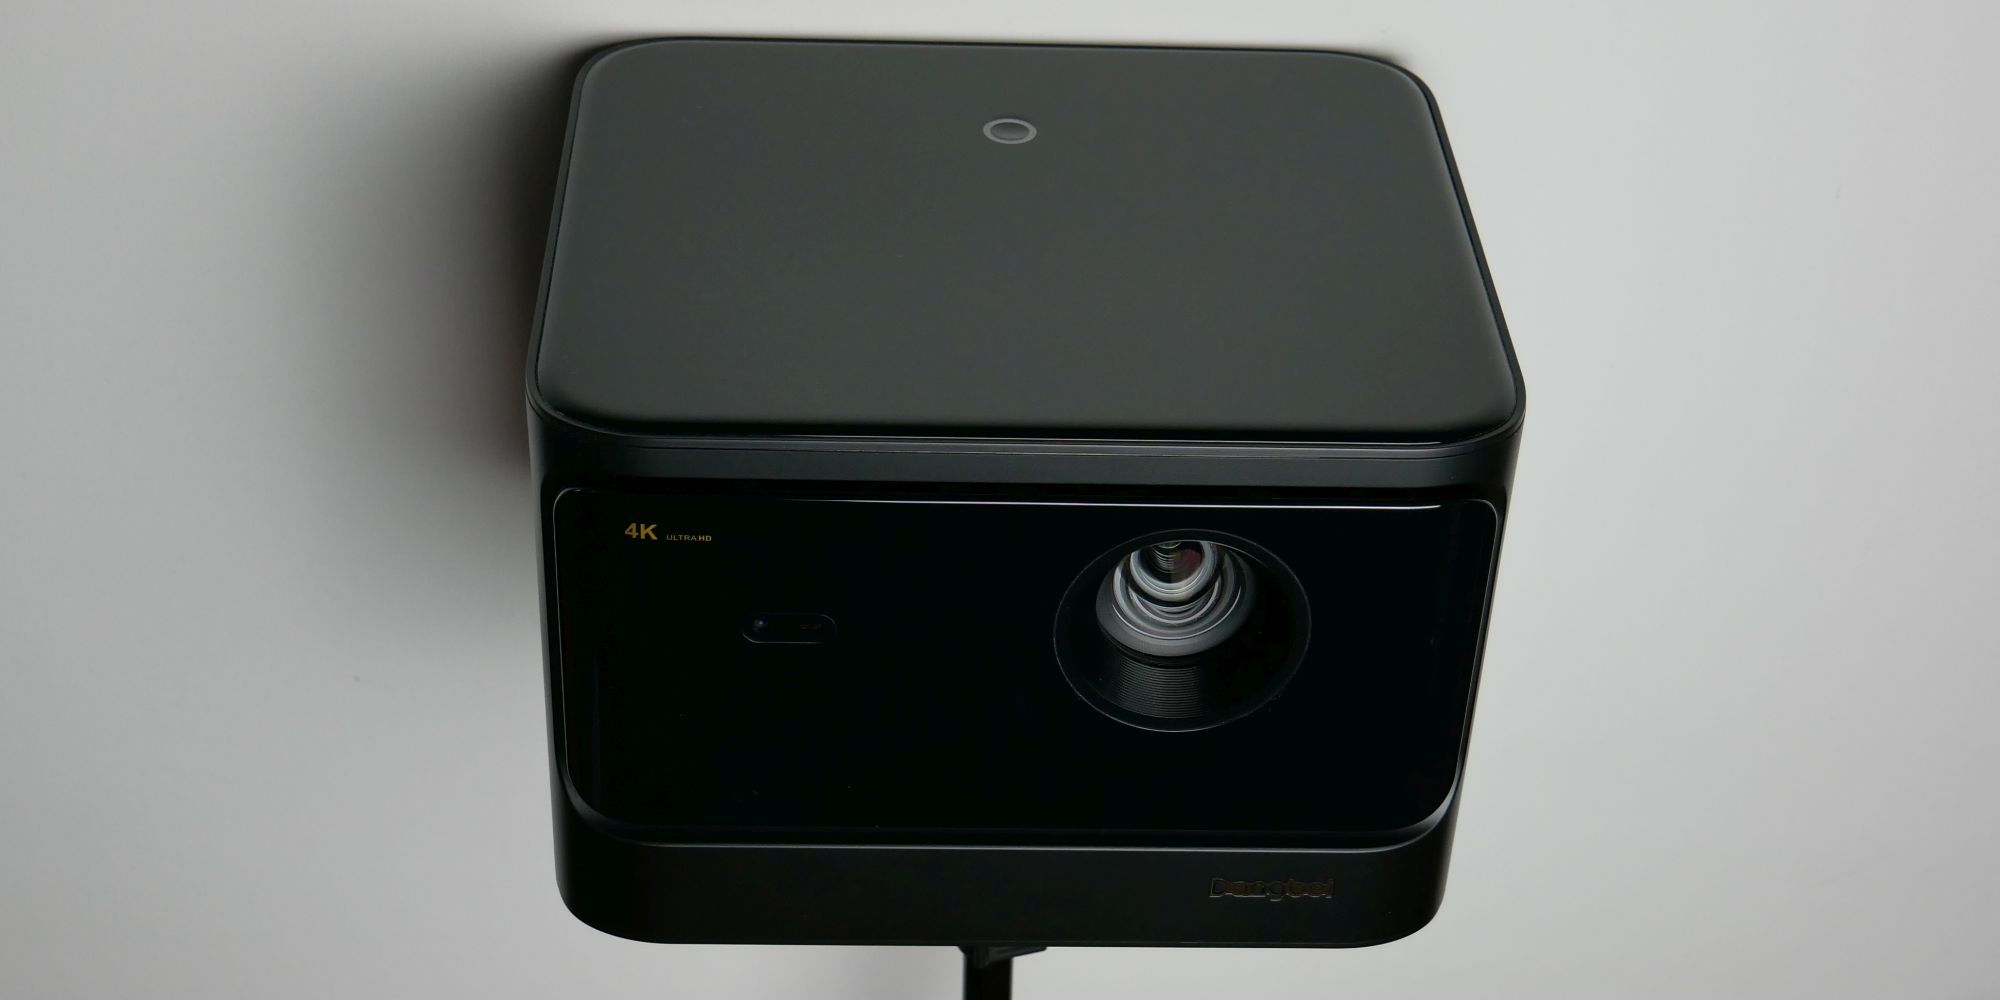  Dangbei Mars Pro 4K Projector with Dongle and Ceiling Mount :  Electronics